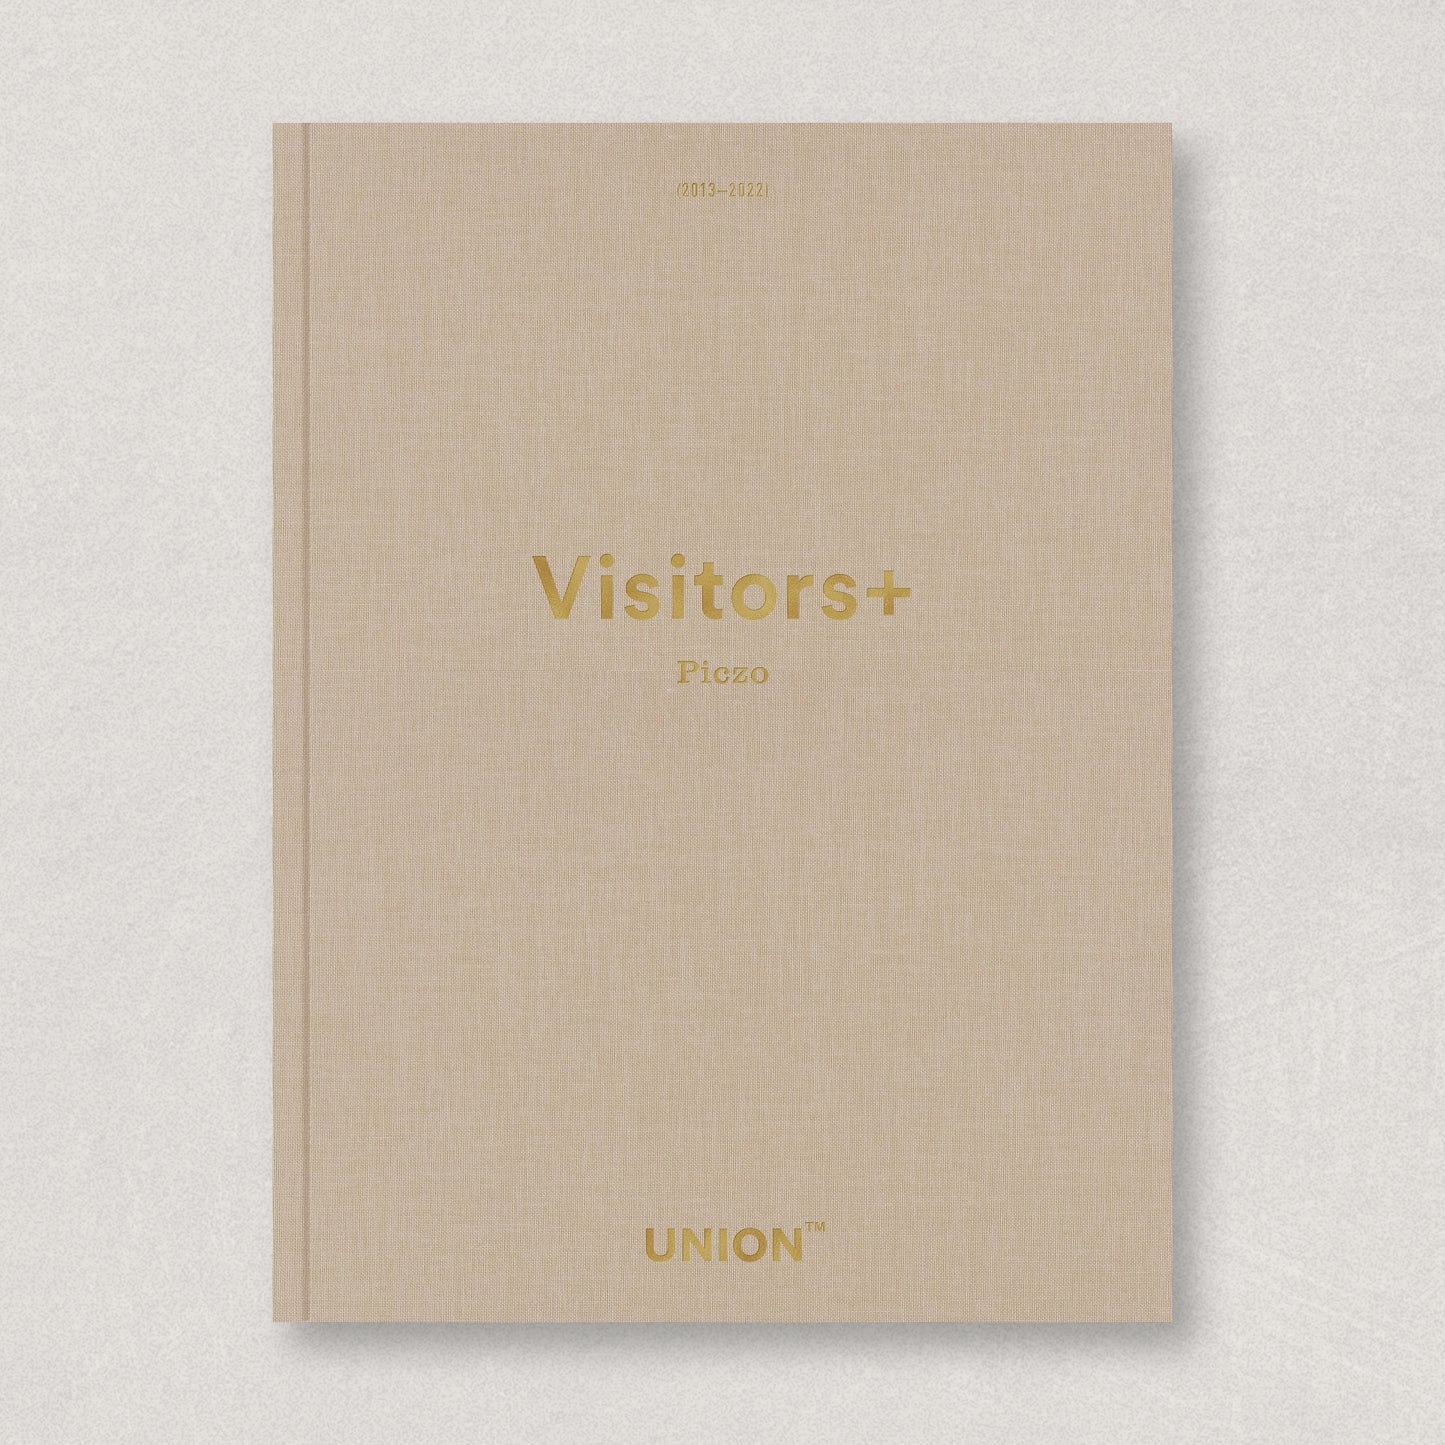 Visitors+ by Piczo